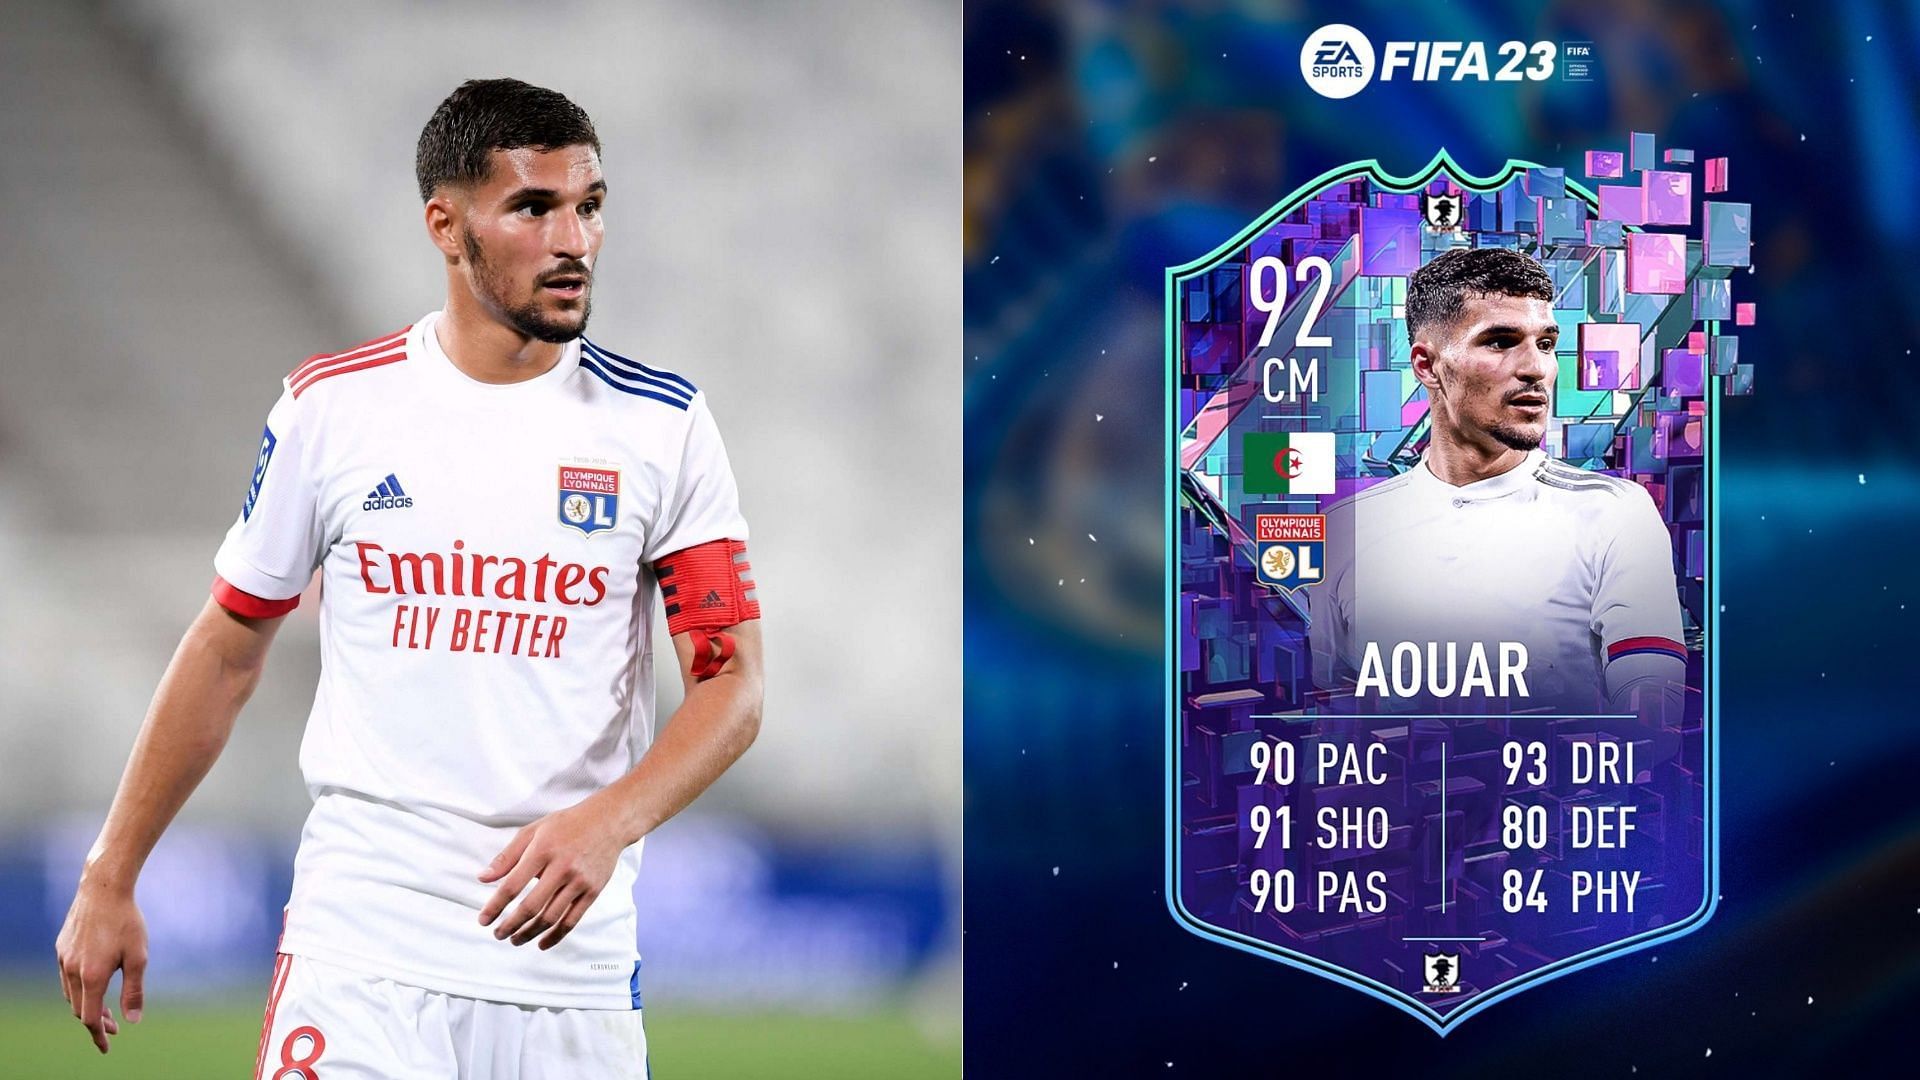 The Houssem Aouar Flashback SBC could become a fan-favorite in the FIFA 23 Ligue 1 TOTS promo (Images via Getty, Twitter/FUT Sheriff)